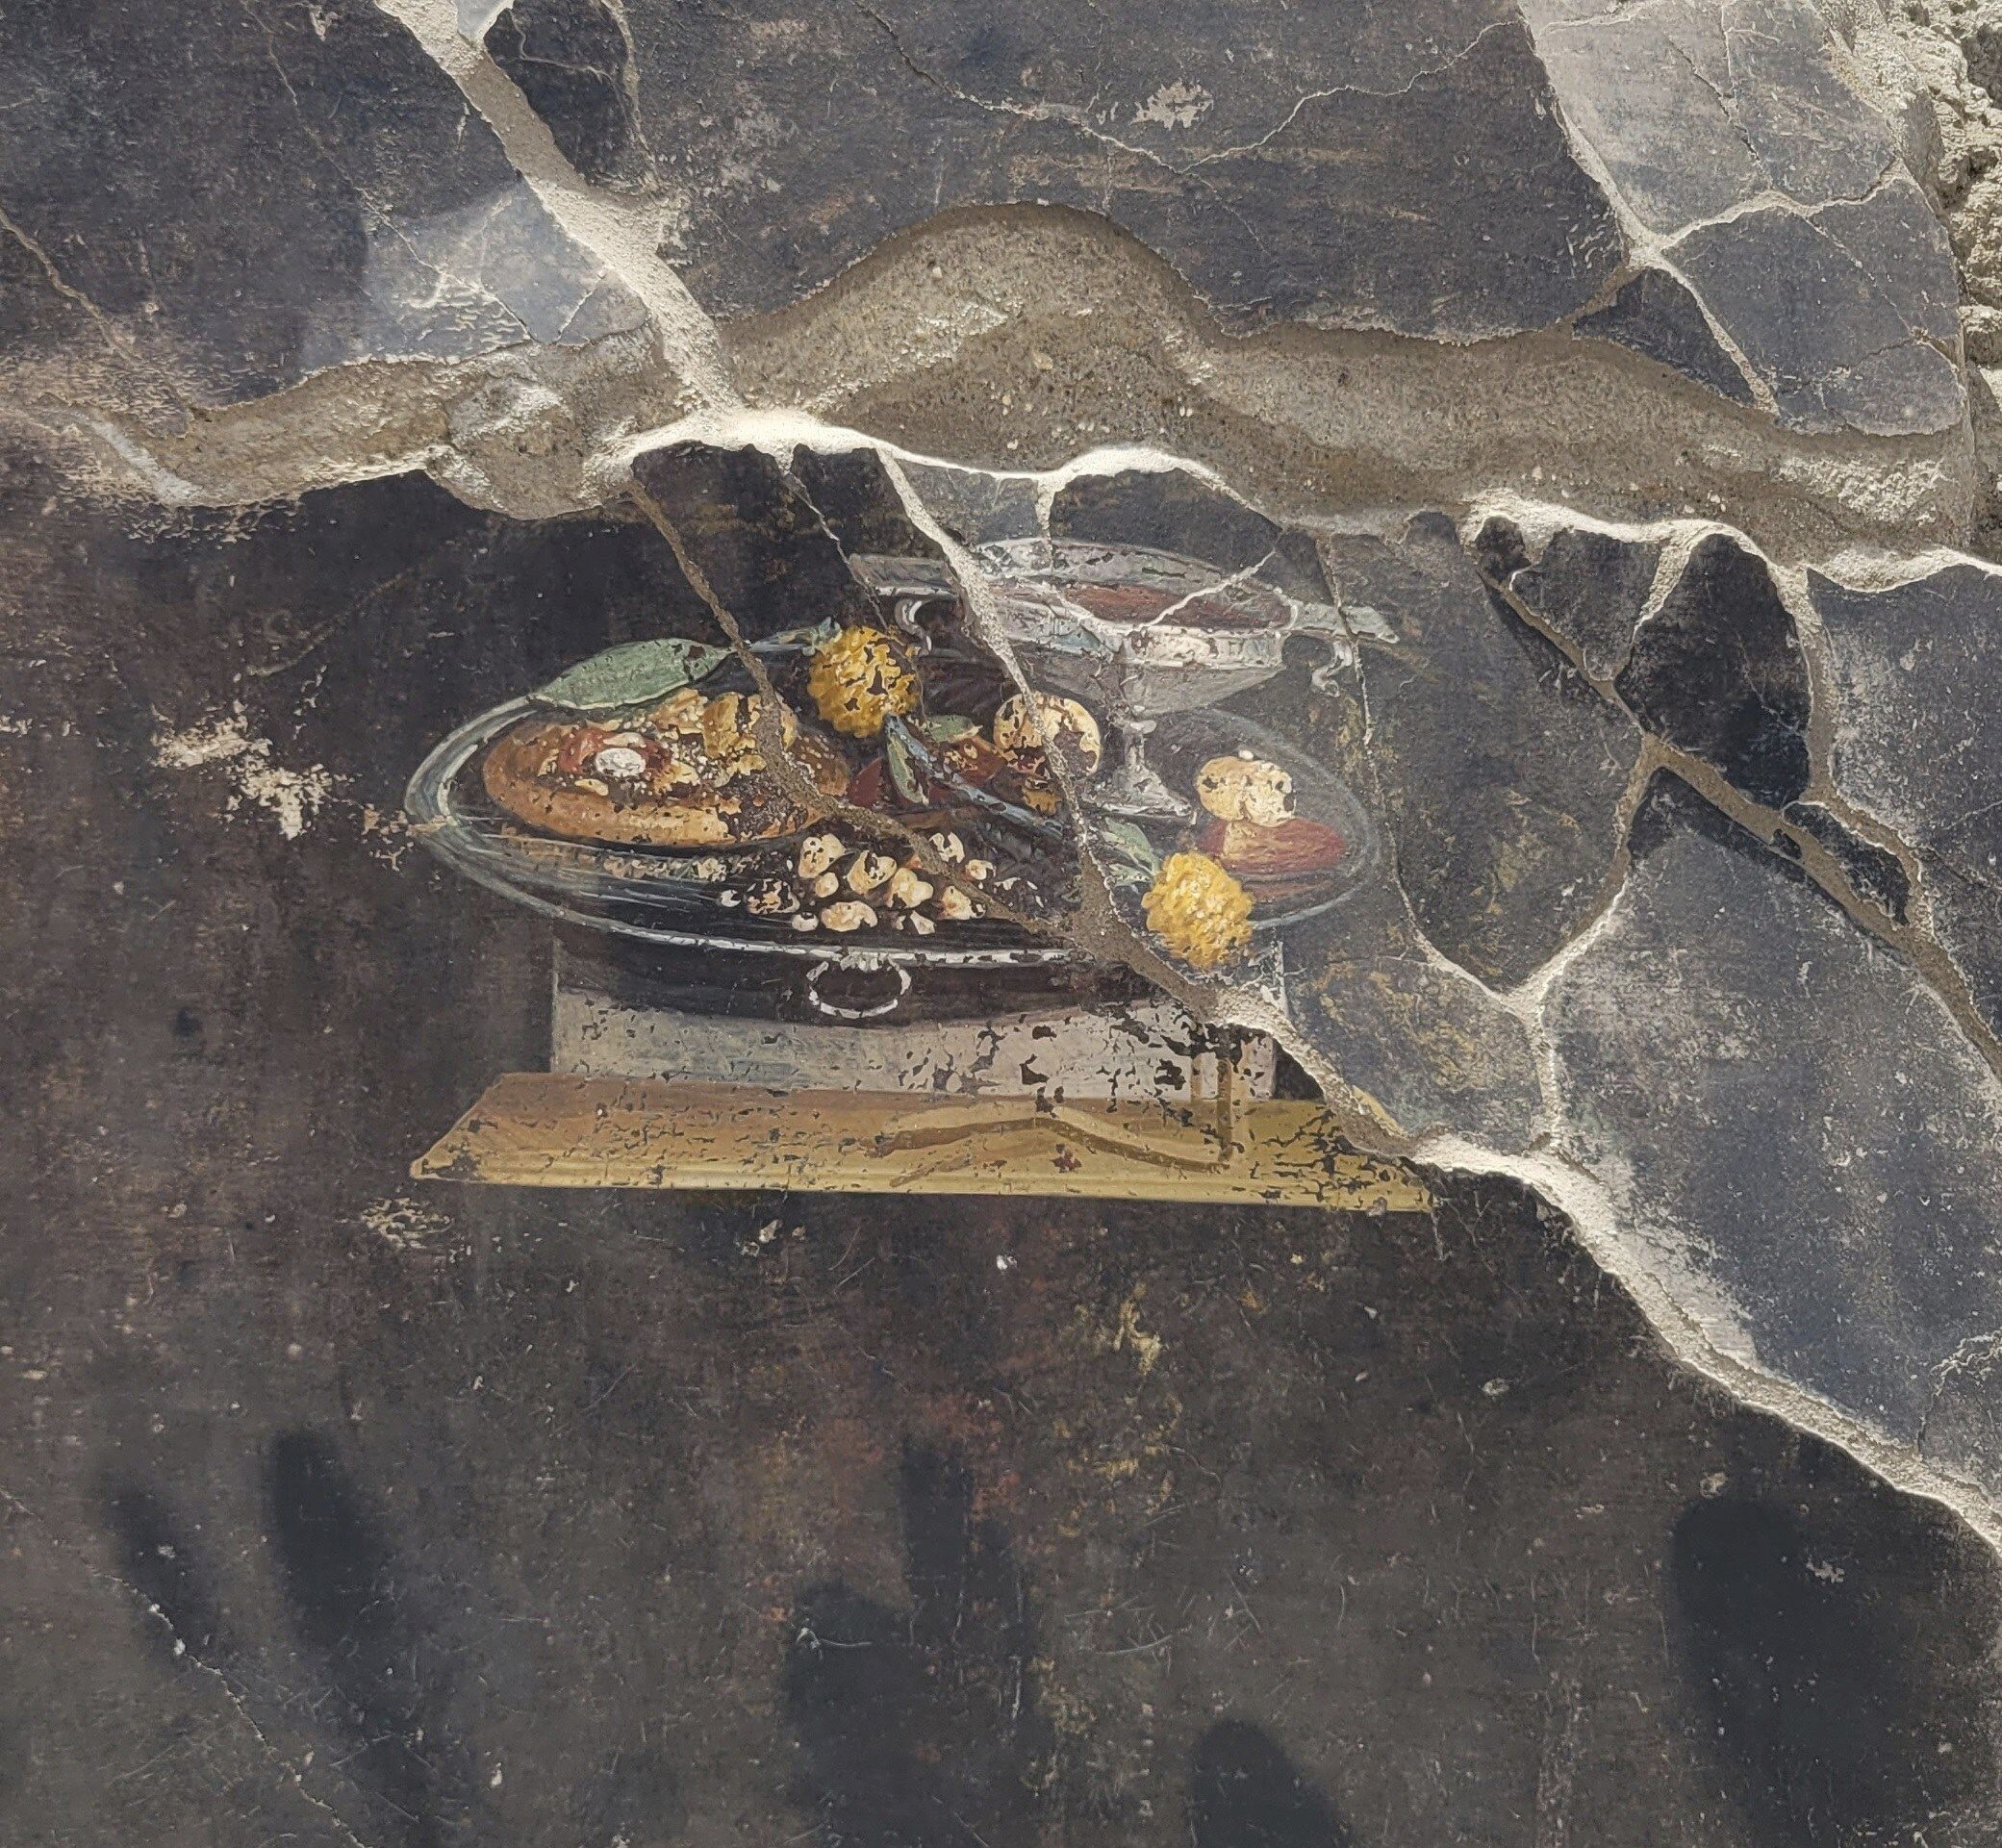 The wall of an ancient Pompeian house with a fresco depicting a table with food. The fresco was found in the atrium of a house in Insula 10 of Regio IX under excavation, to which a bakery was annexed. Photo: Pompeii Archaeological Park via AP